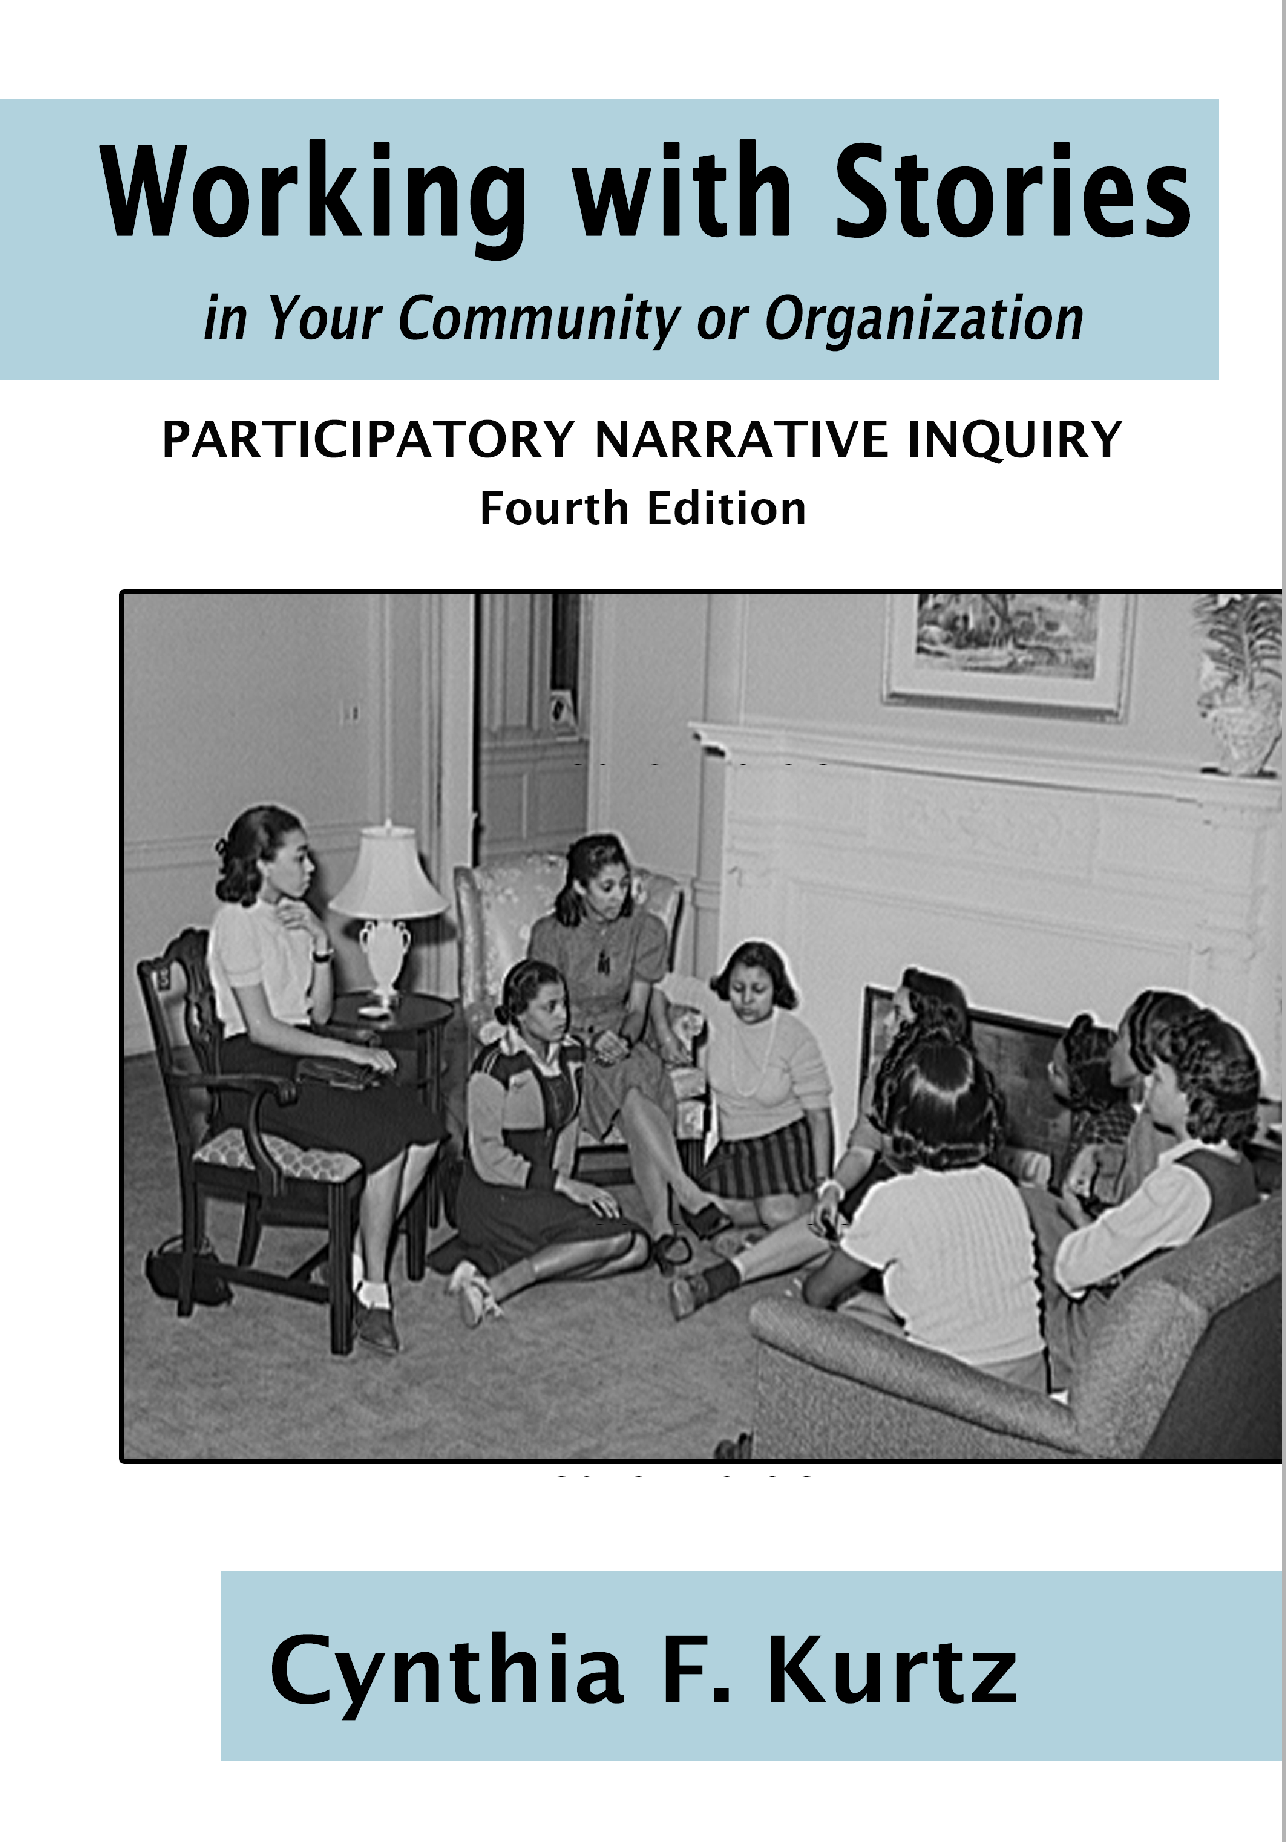 Working with Stories in Your Community or Organization: Participatory Narrative Inquiry (Fourth Edition)